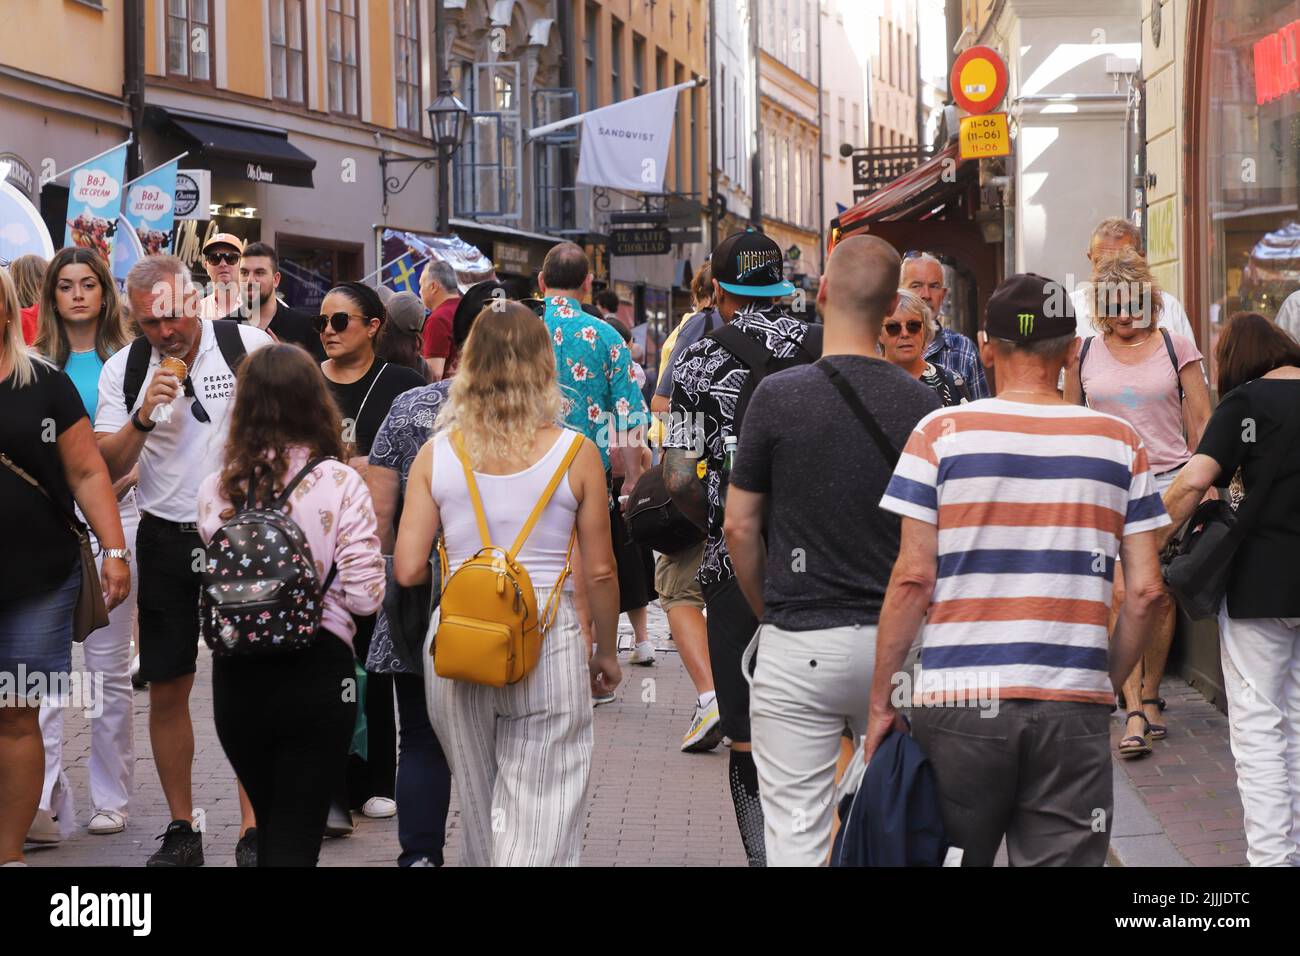 Stockholm, Sweden - July 12, 2022: Visitors crowding the Vasterlanggatan street in the Old town district. Stock Photo